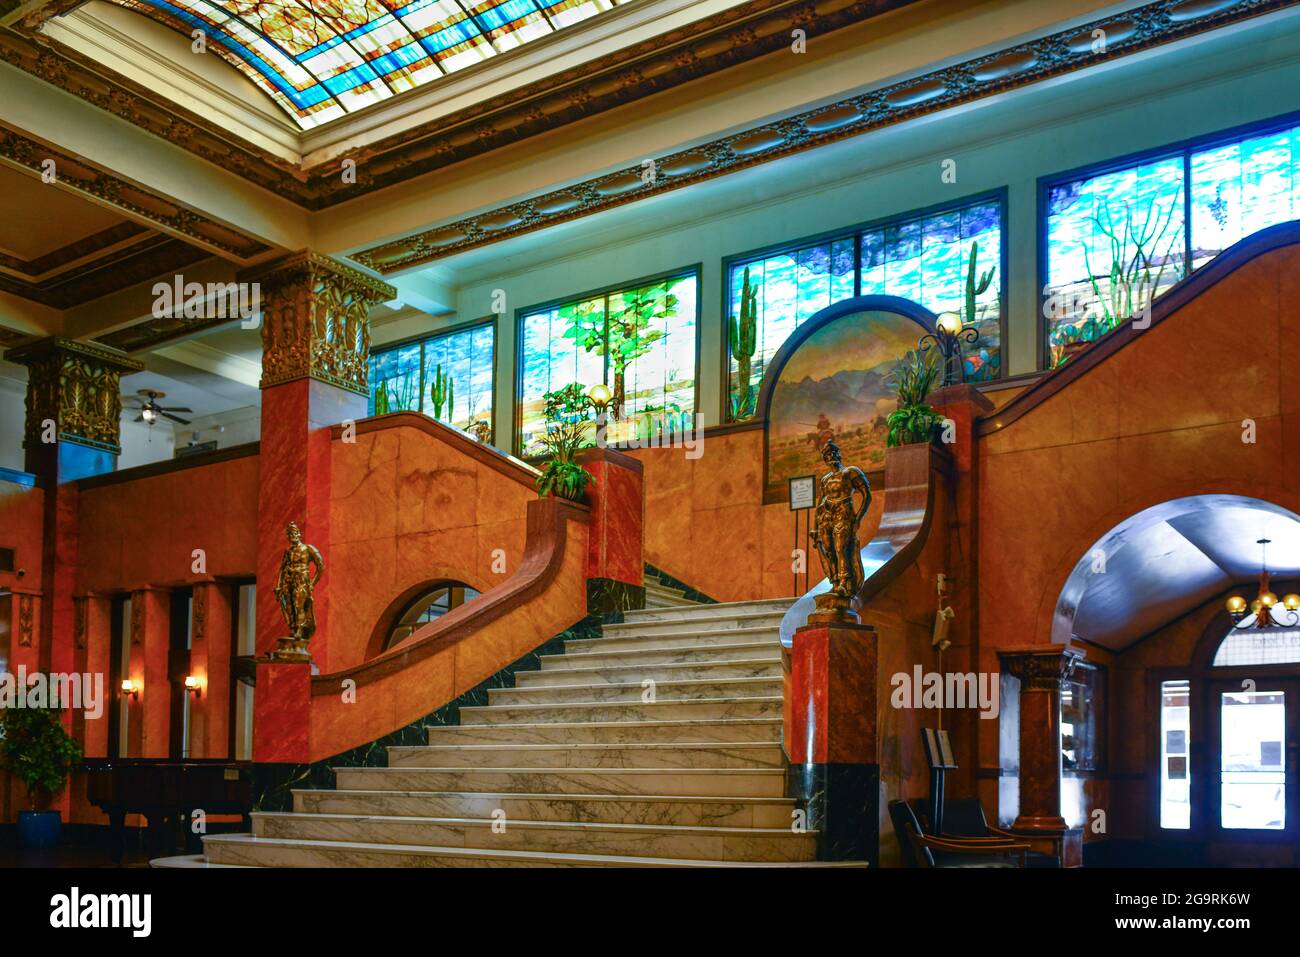 Opened in 1907, the ornate lobby of the landmark Gadsden Hotel with it's grand staircase in the Mexican border town of Douglas, AZ Stock Photo